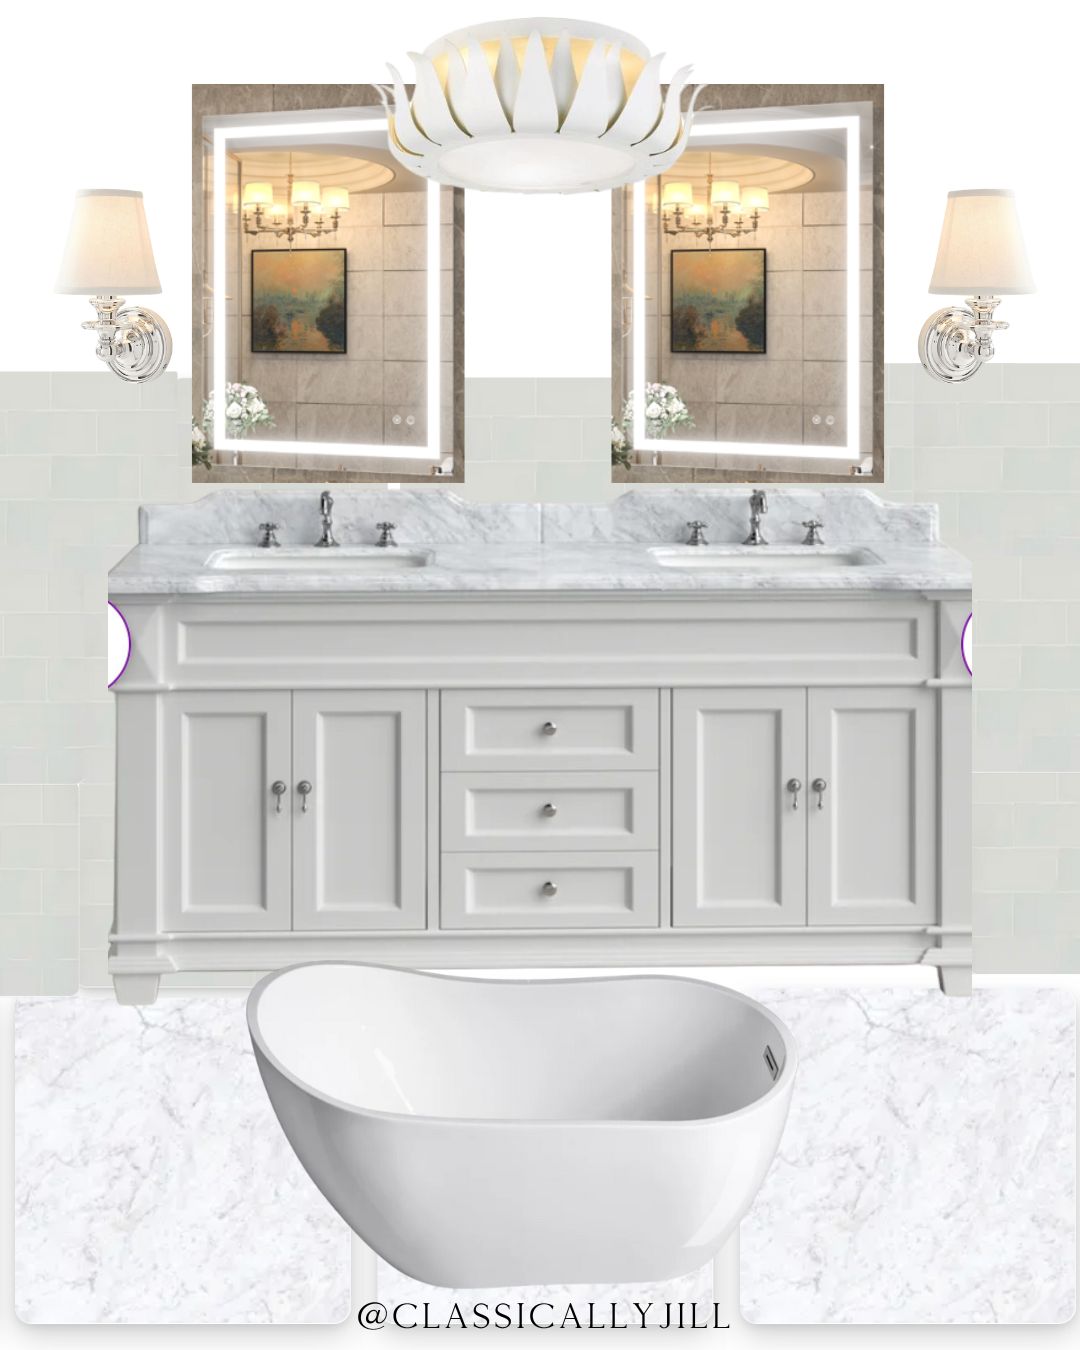 Designing Our Primary Bathroom at Our Classic Colonial, Should We Do Our Dream Marble Bathroom?